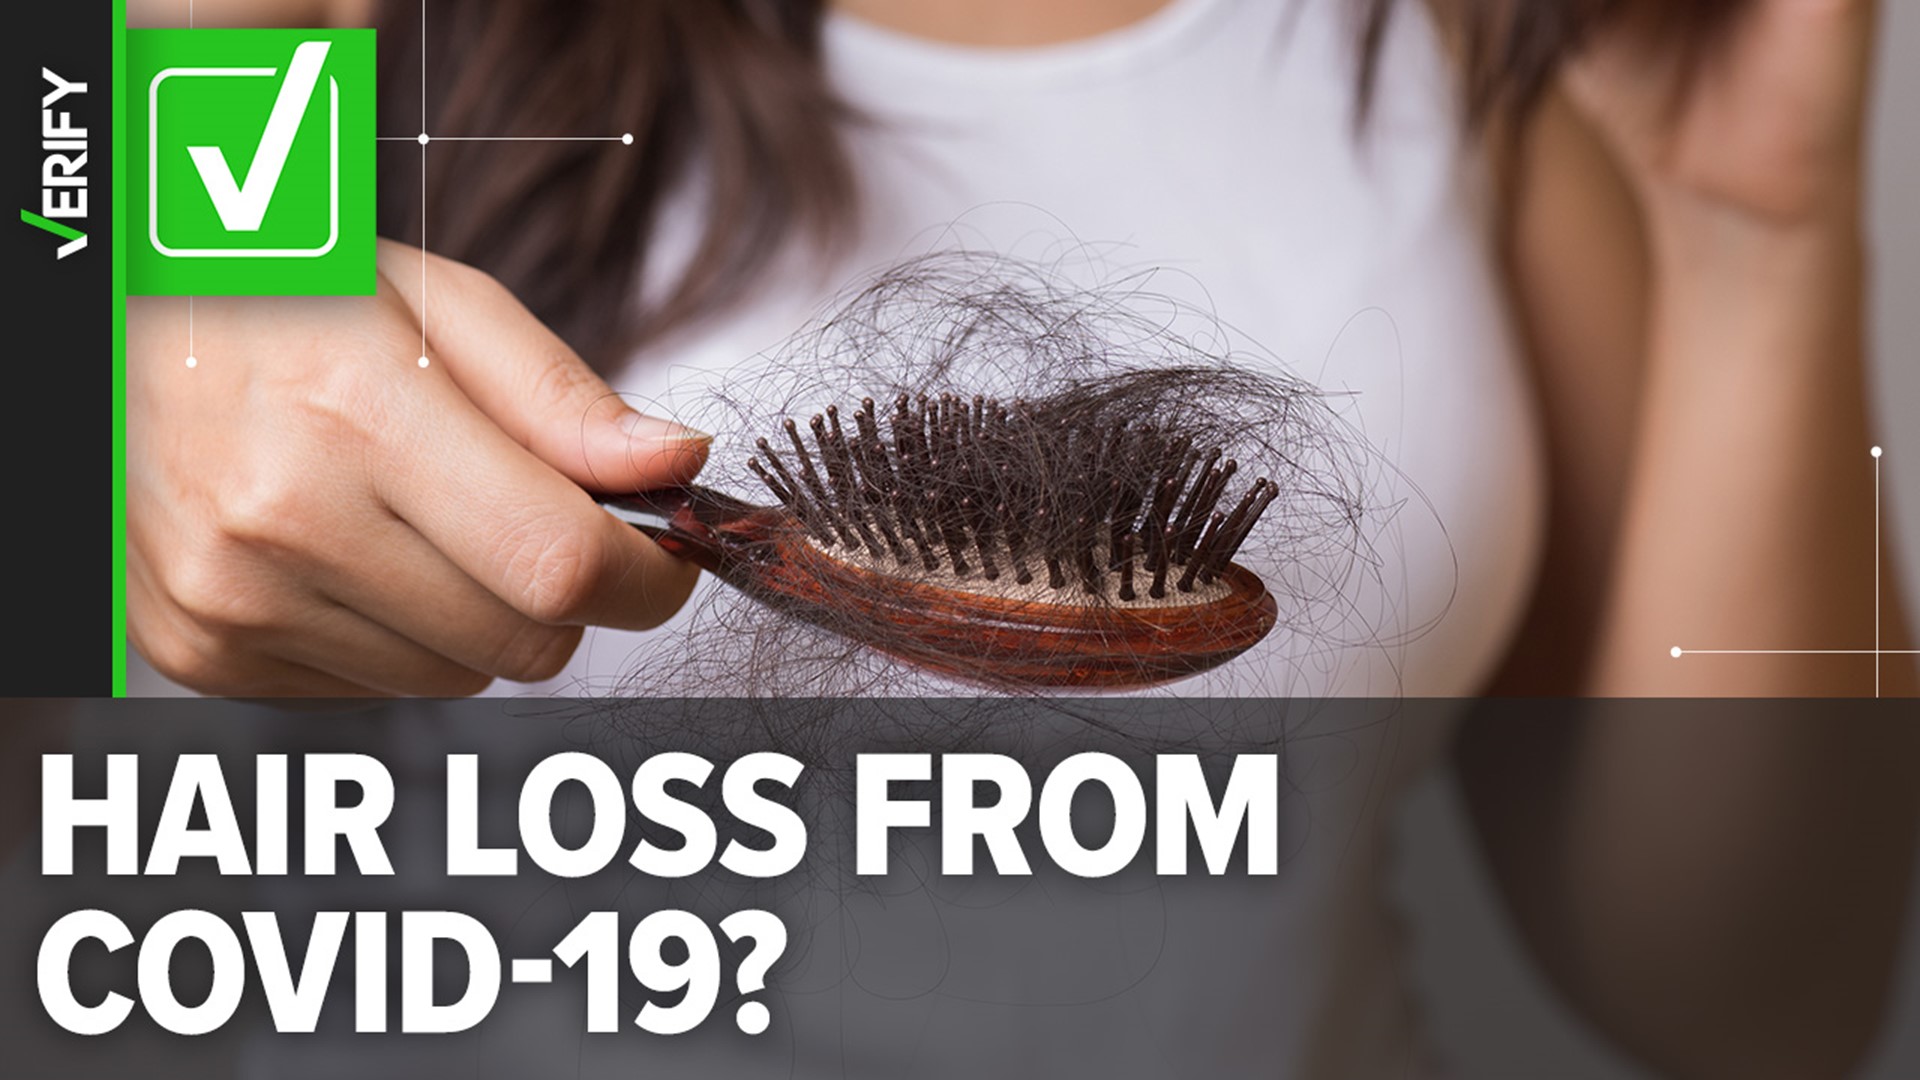 Temporary hair loss or excessive hair shedding is normal after a fever or illness, such as COVID-19. Pandemic-related stress is another possible factor.